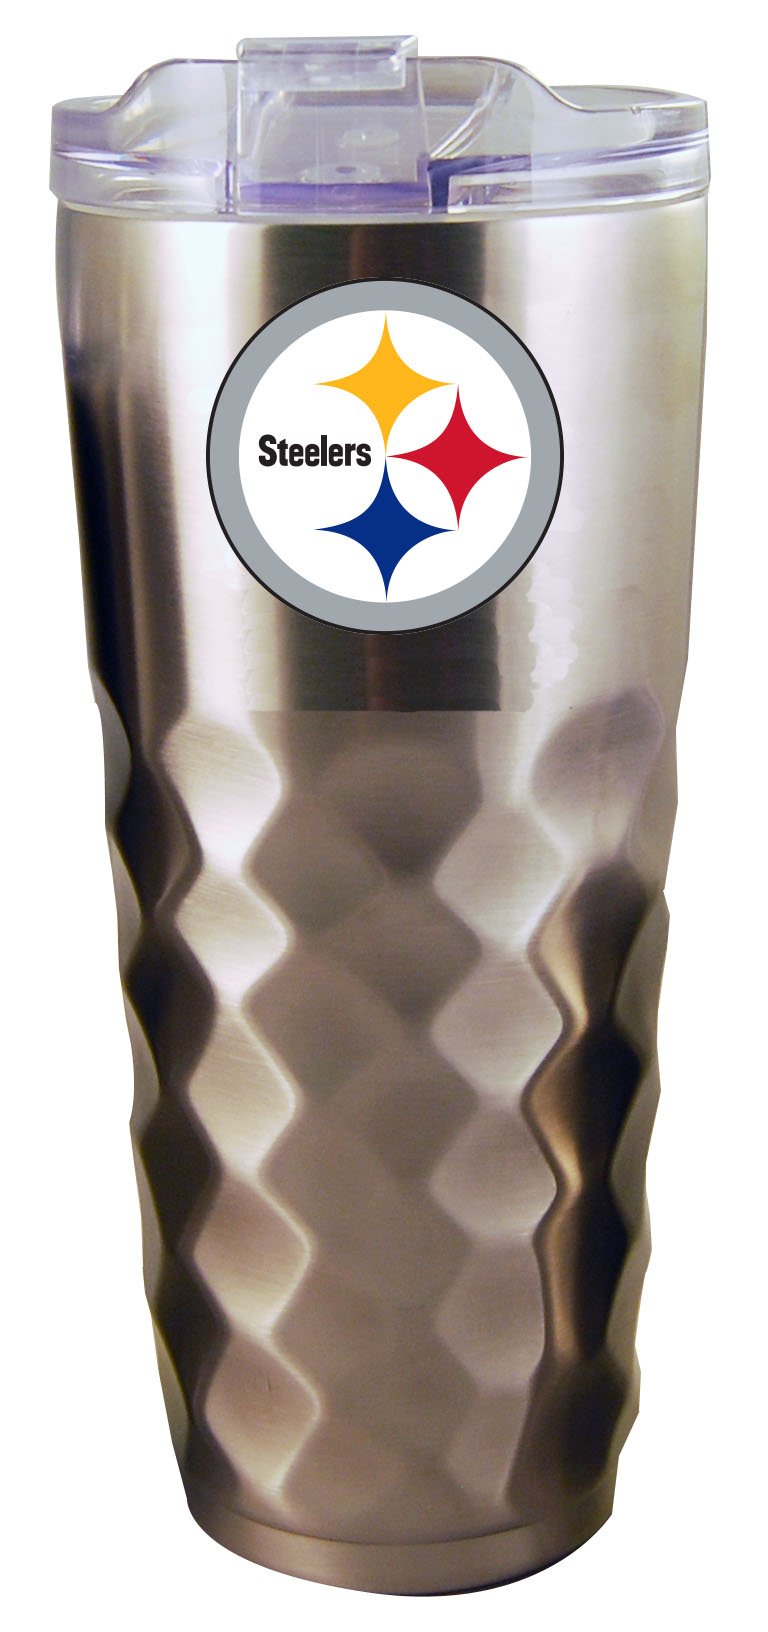 32OZ SS DIAMD TMBLR STEELERS
CurrentProduct, Drinkware_category_All, NFL, Pittsburgh Steelers, PST
The Memory Company